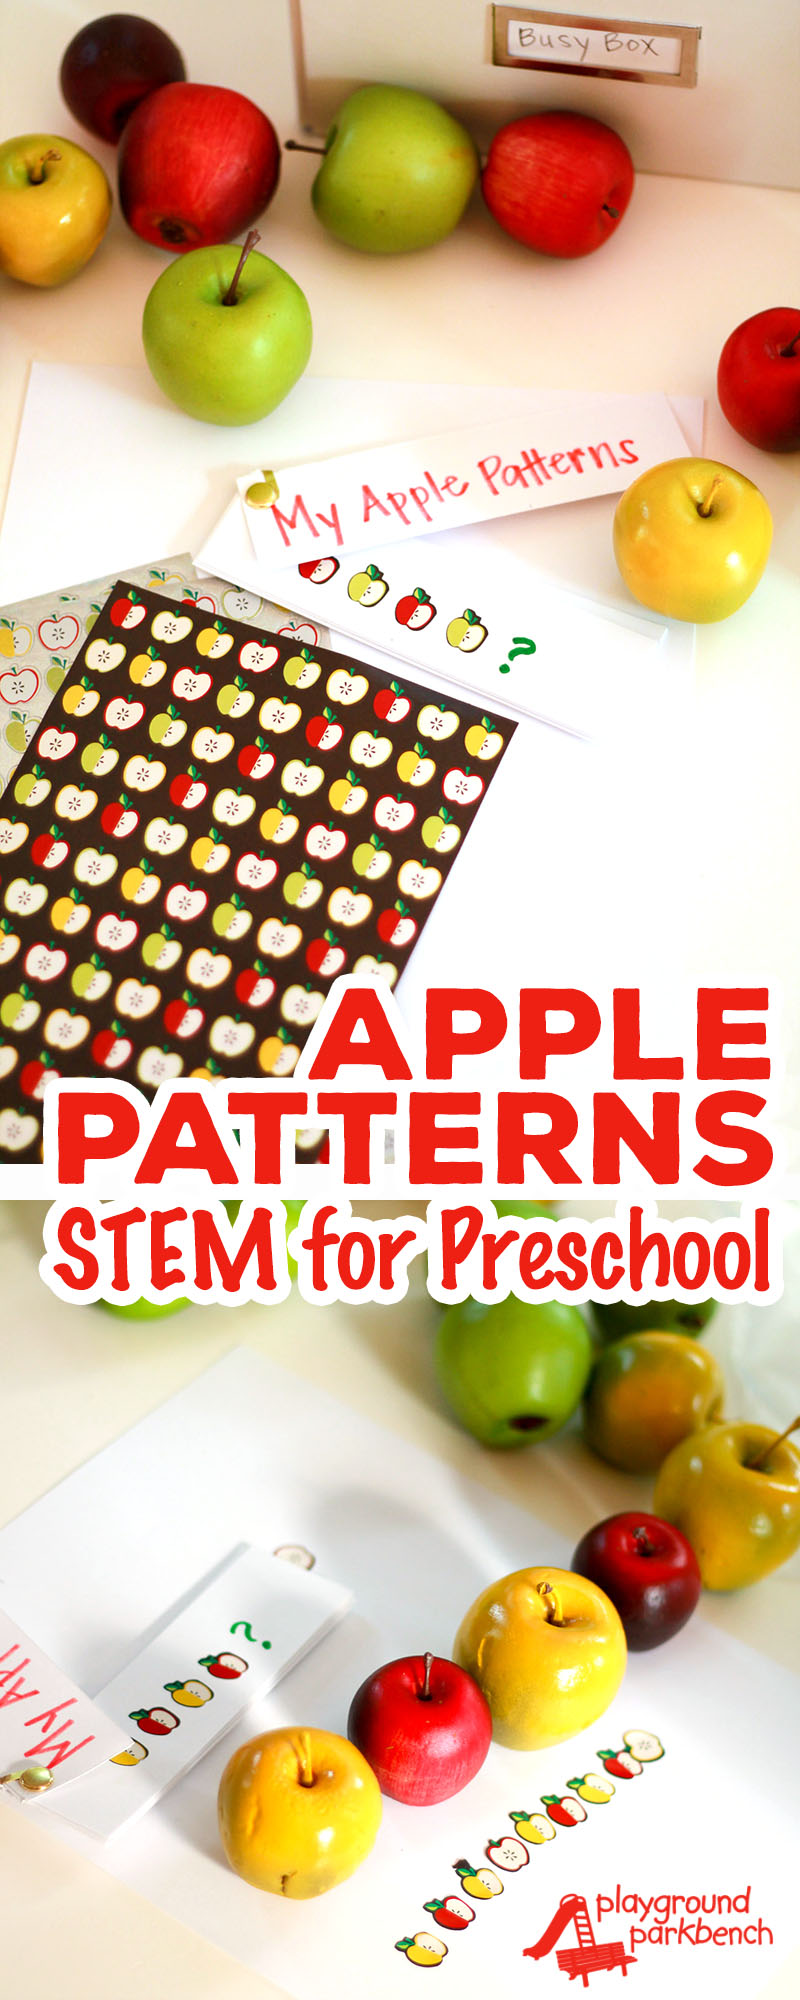 Recognizing patterns makes for great STEM preschool activities. This fall themed version features different color apples and stickers to match.